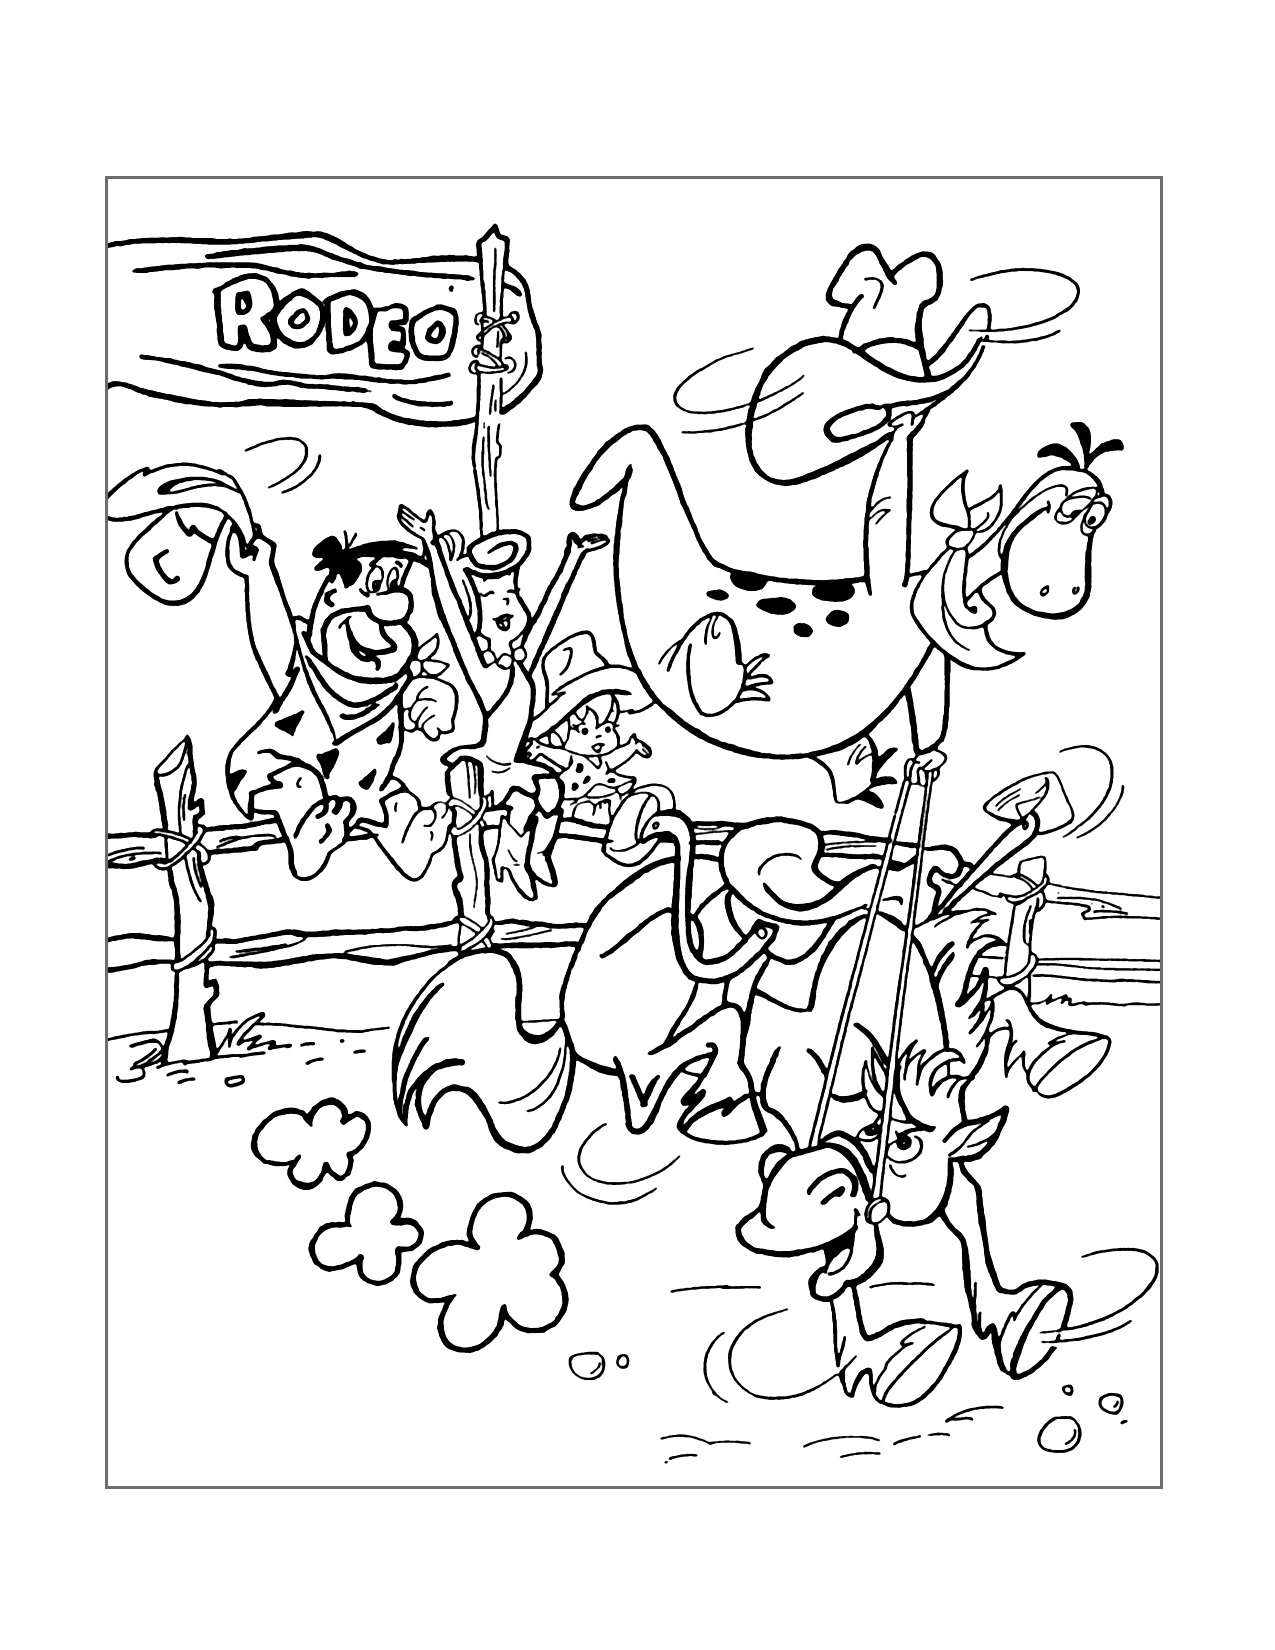 Flintstones At The Rodeo Coloring Page